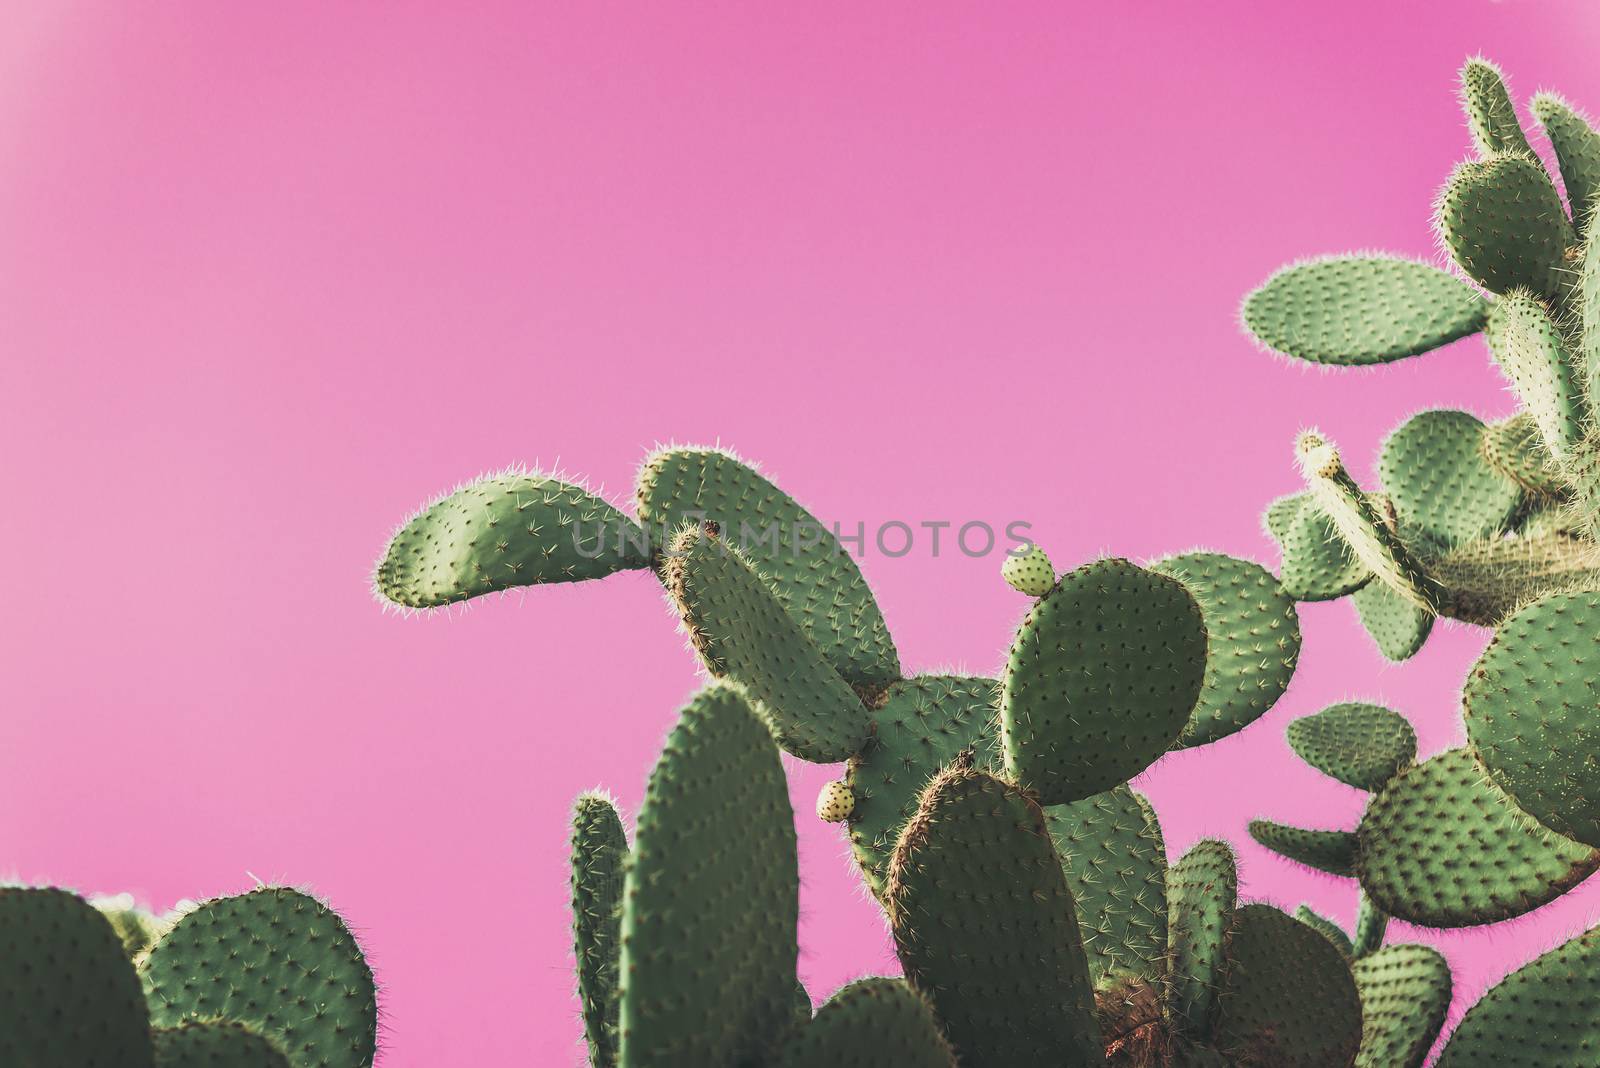 green Prickly Pear Cactus on pink background, creative pop art style with pastel shades, copy space for text